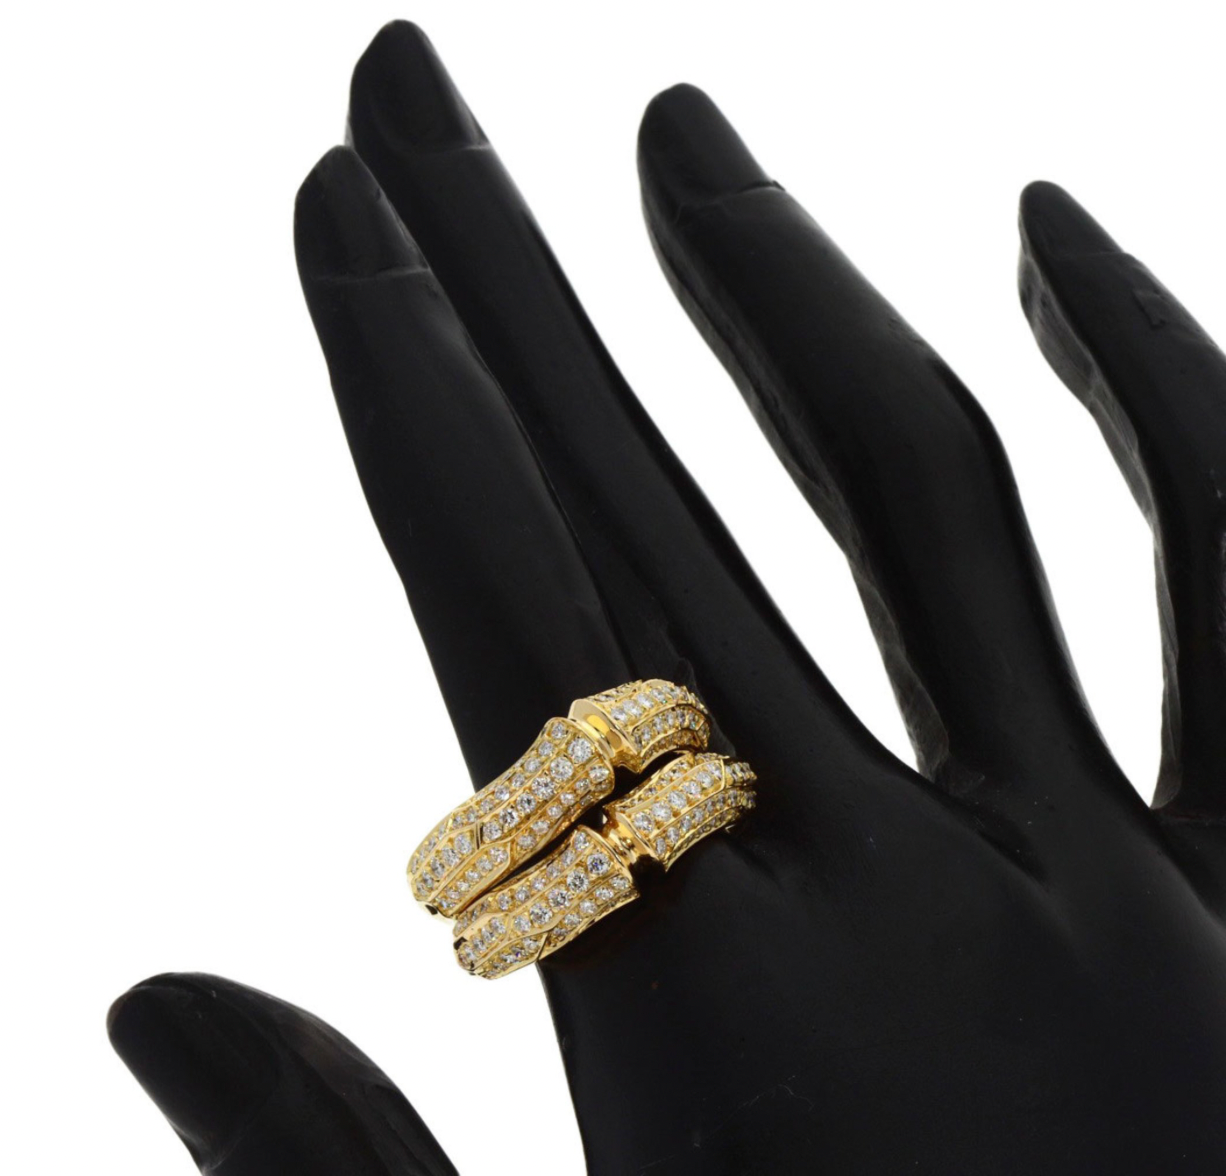 Pre-owned 18k yellow gold ring from Cartier Bamboo collection set with 1.65ctw of diamonds